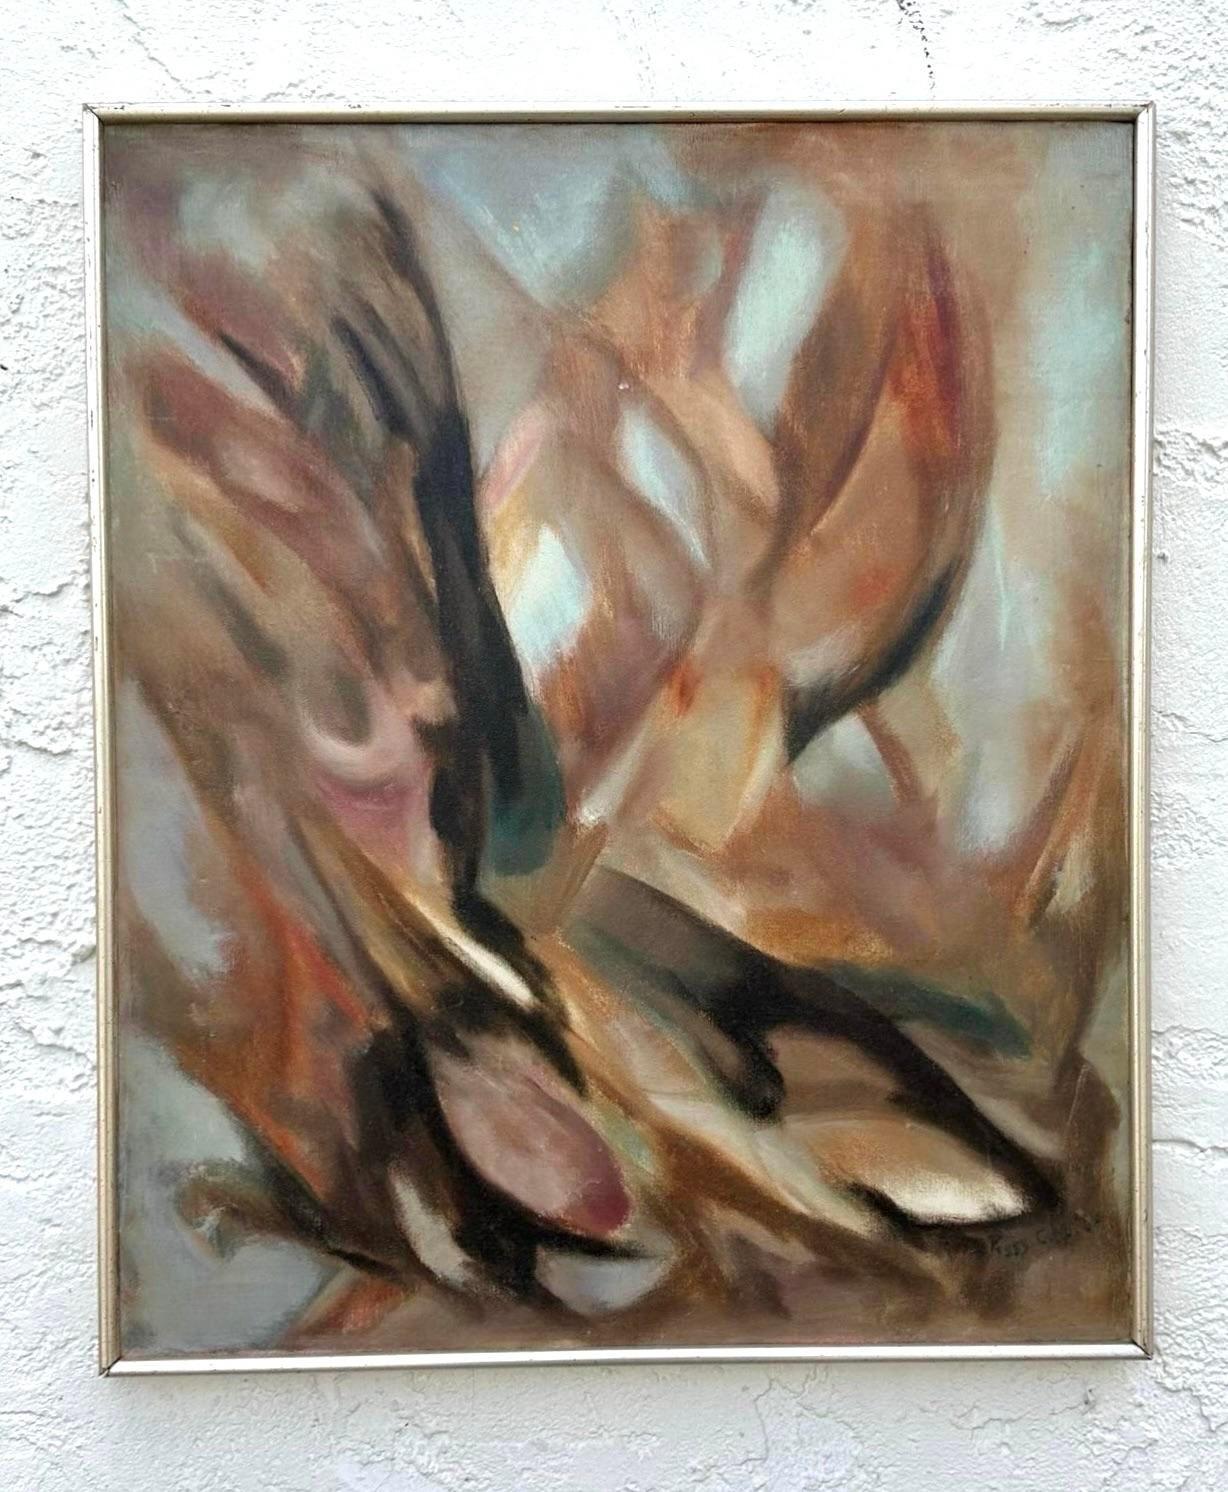 A stunning vintage Boho original oil painting on canvas. A brilliant Abstract in soft muted colors. Signed by the artist. Acquired from a Palm Beach estate.